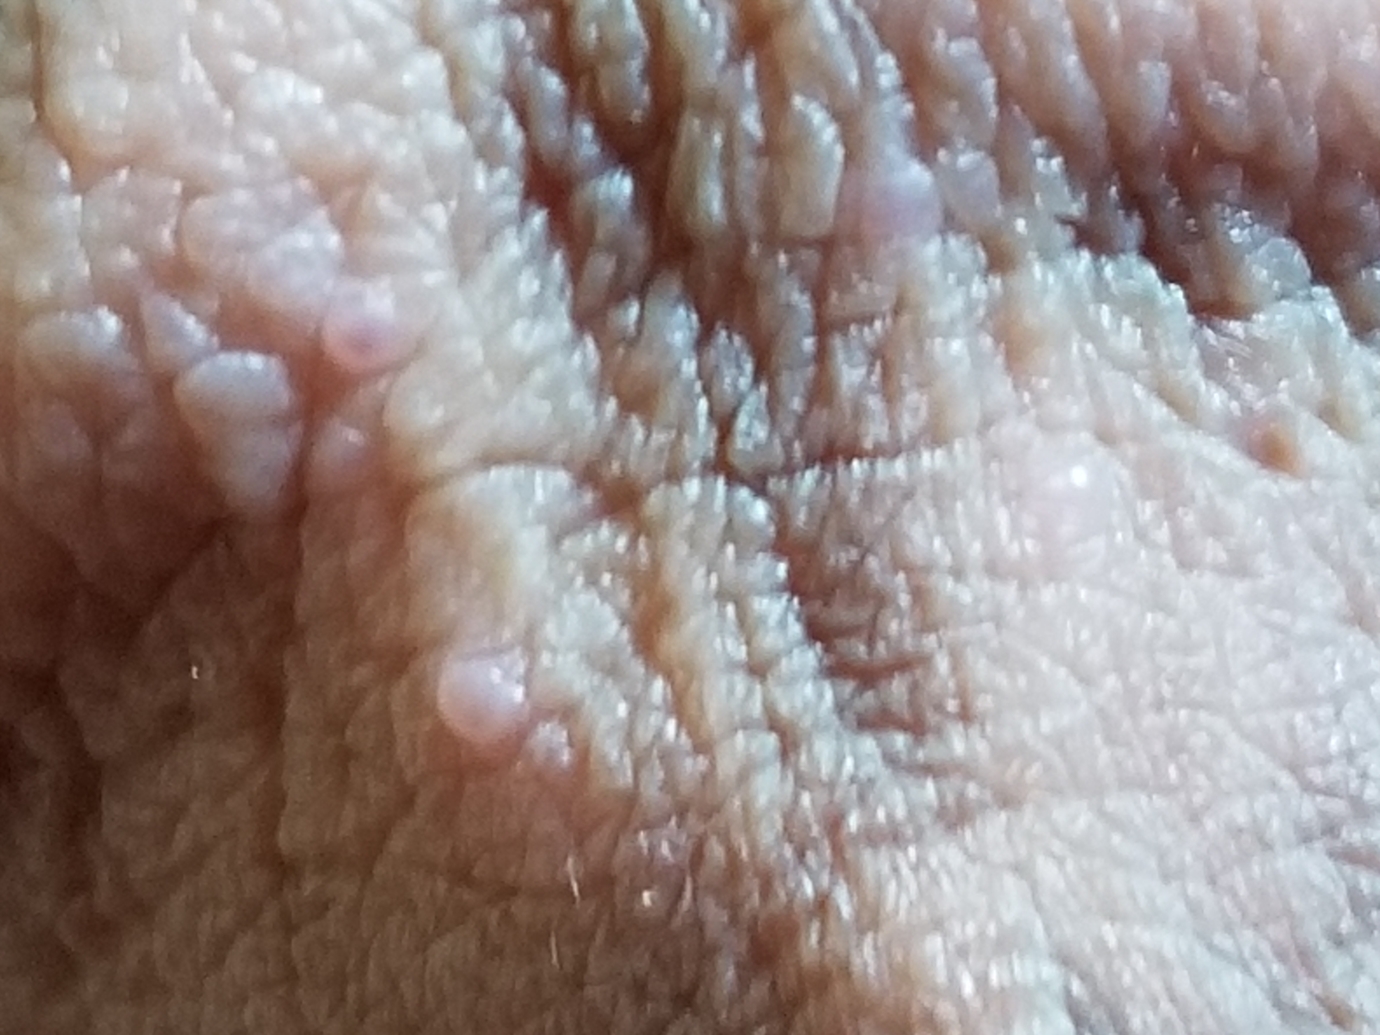 Vs penile herpes papules Difference Between